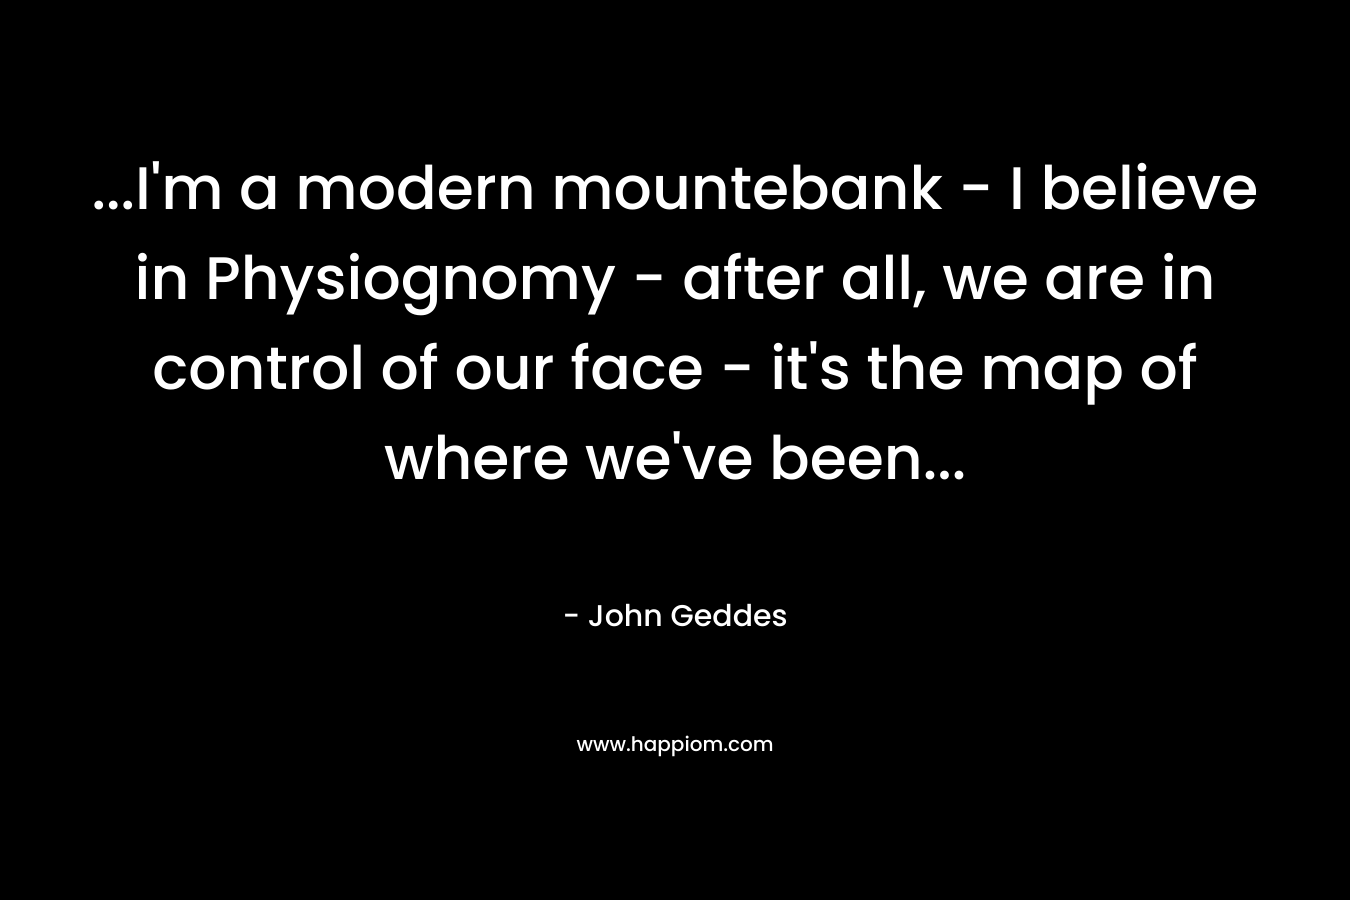 ...I'm a modern mountebank - I believe in Physiognomy - after all, we are in control of our face - it's the map of where we've been...